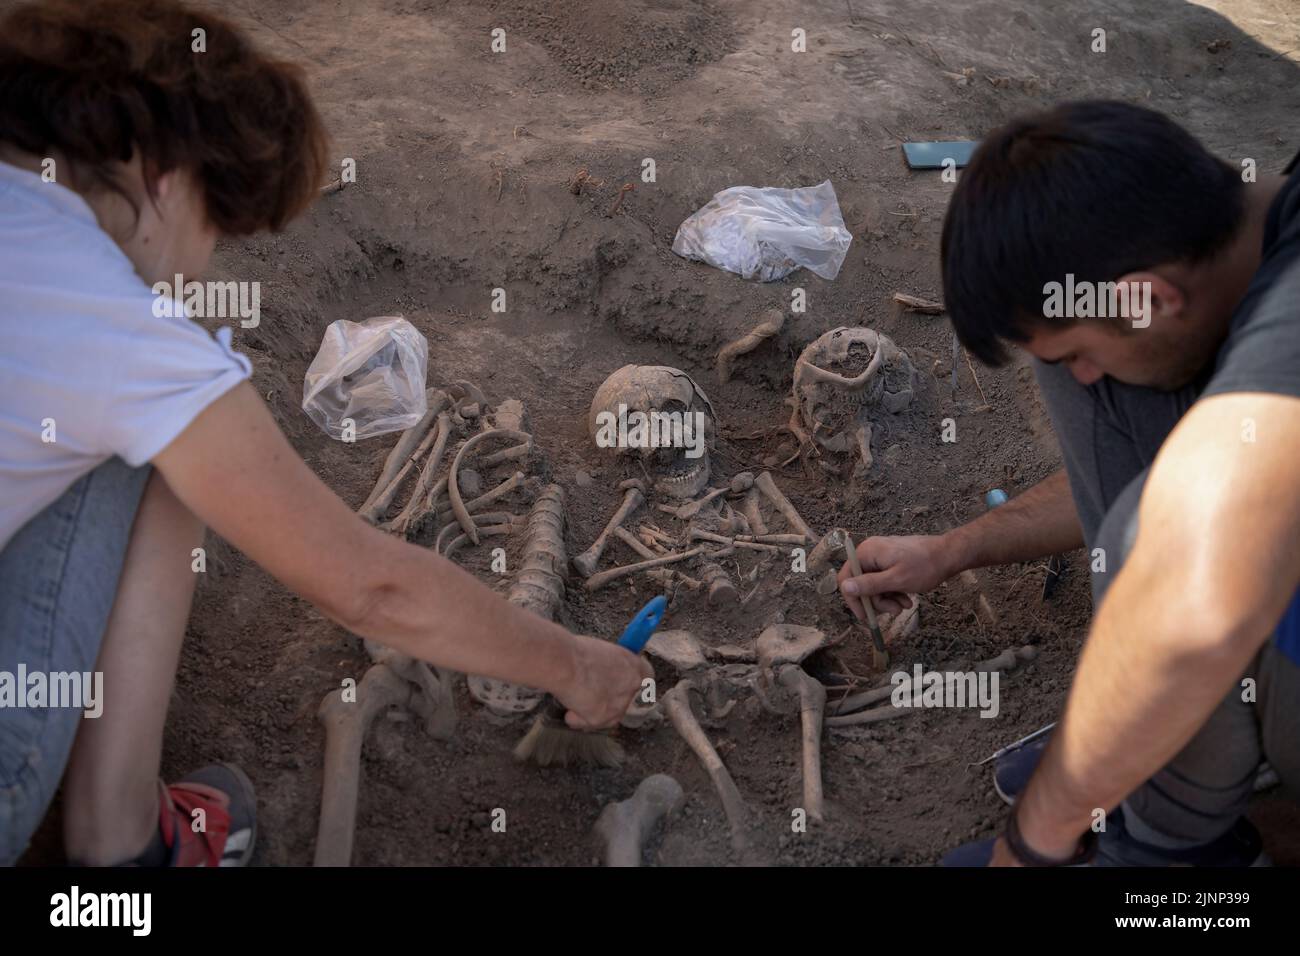 Vinča, Serbia, Sep 4, 2021: Close-up of archaeologists working on human remains excavation Stock Photo